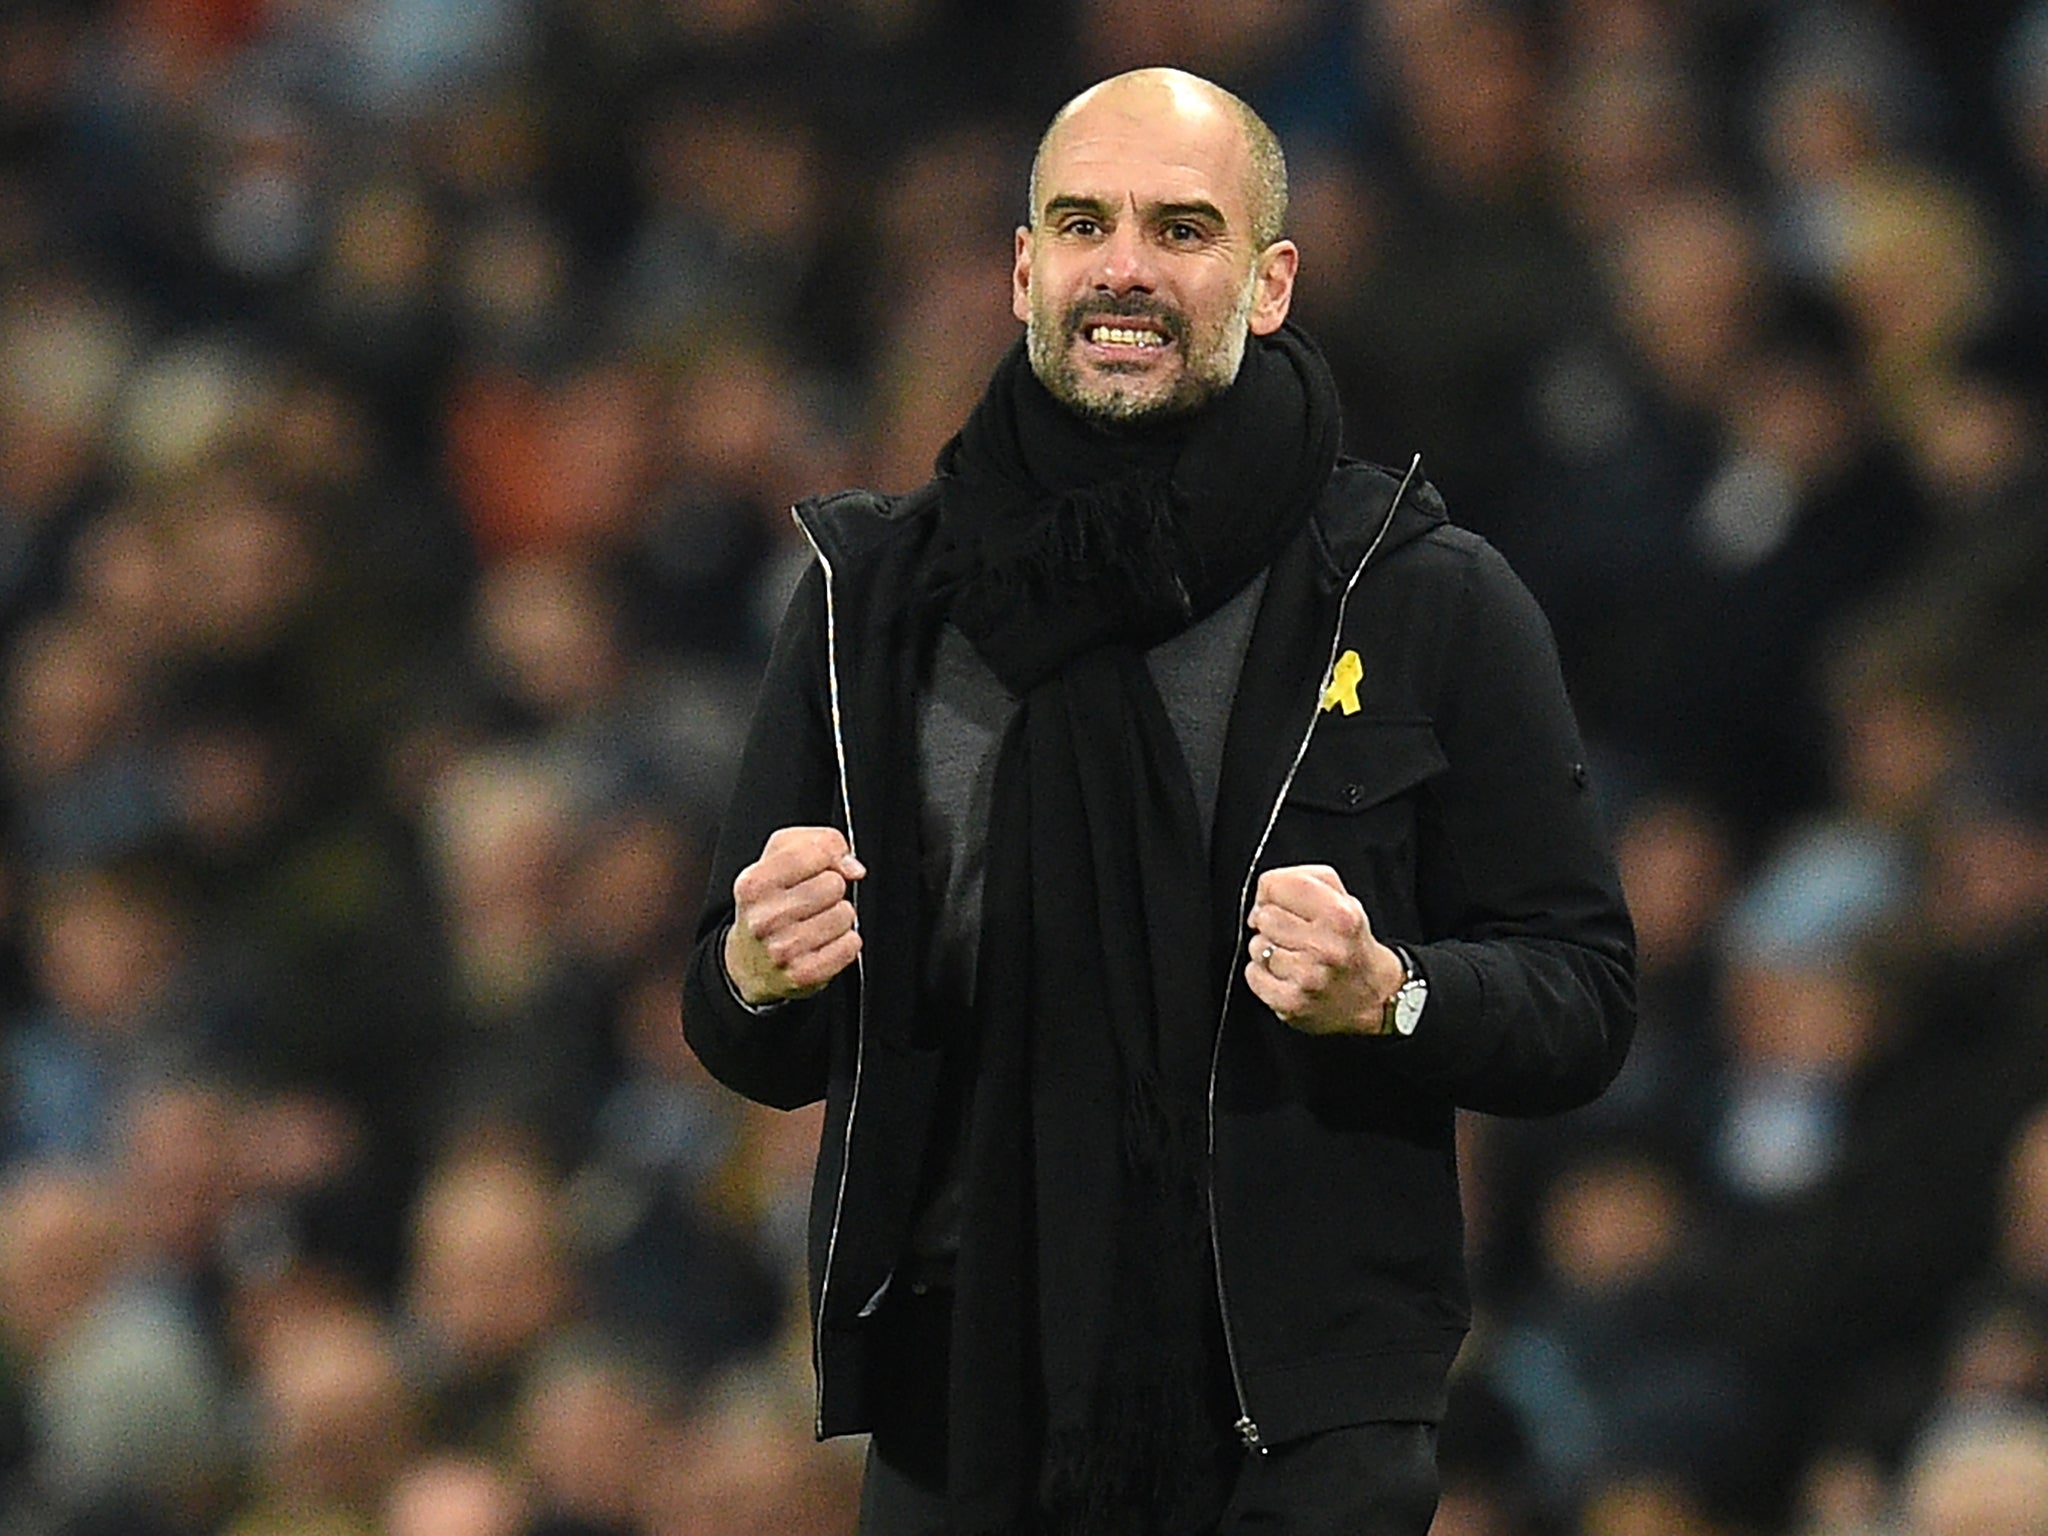 Pep Guardiola sets Manchester City target of winning 10 games to claim the Premier League title